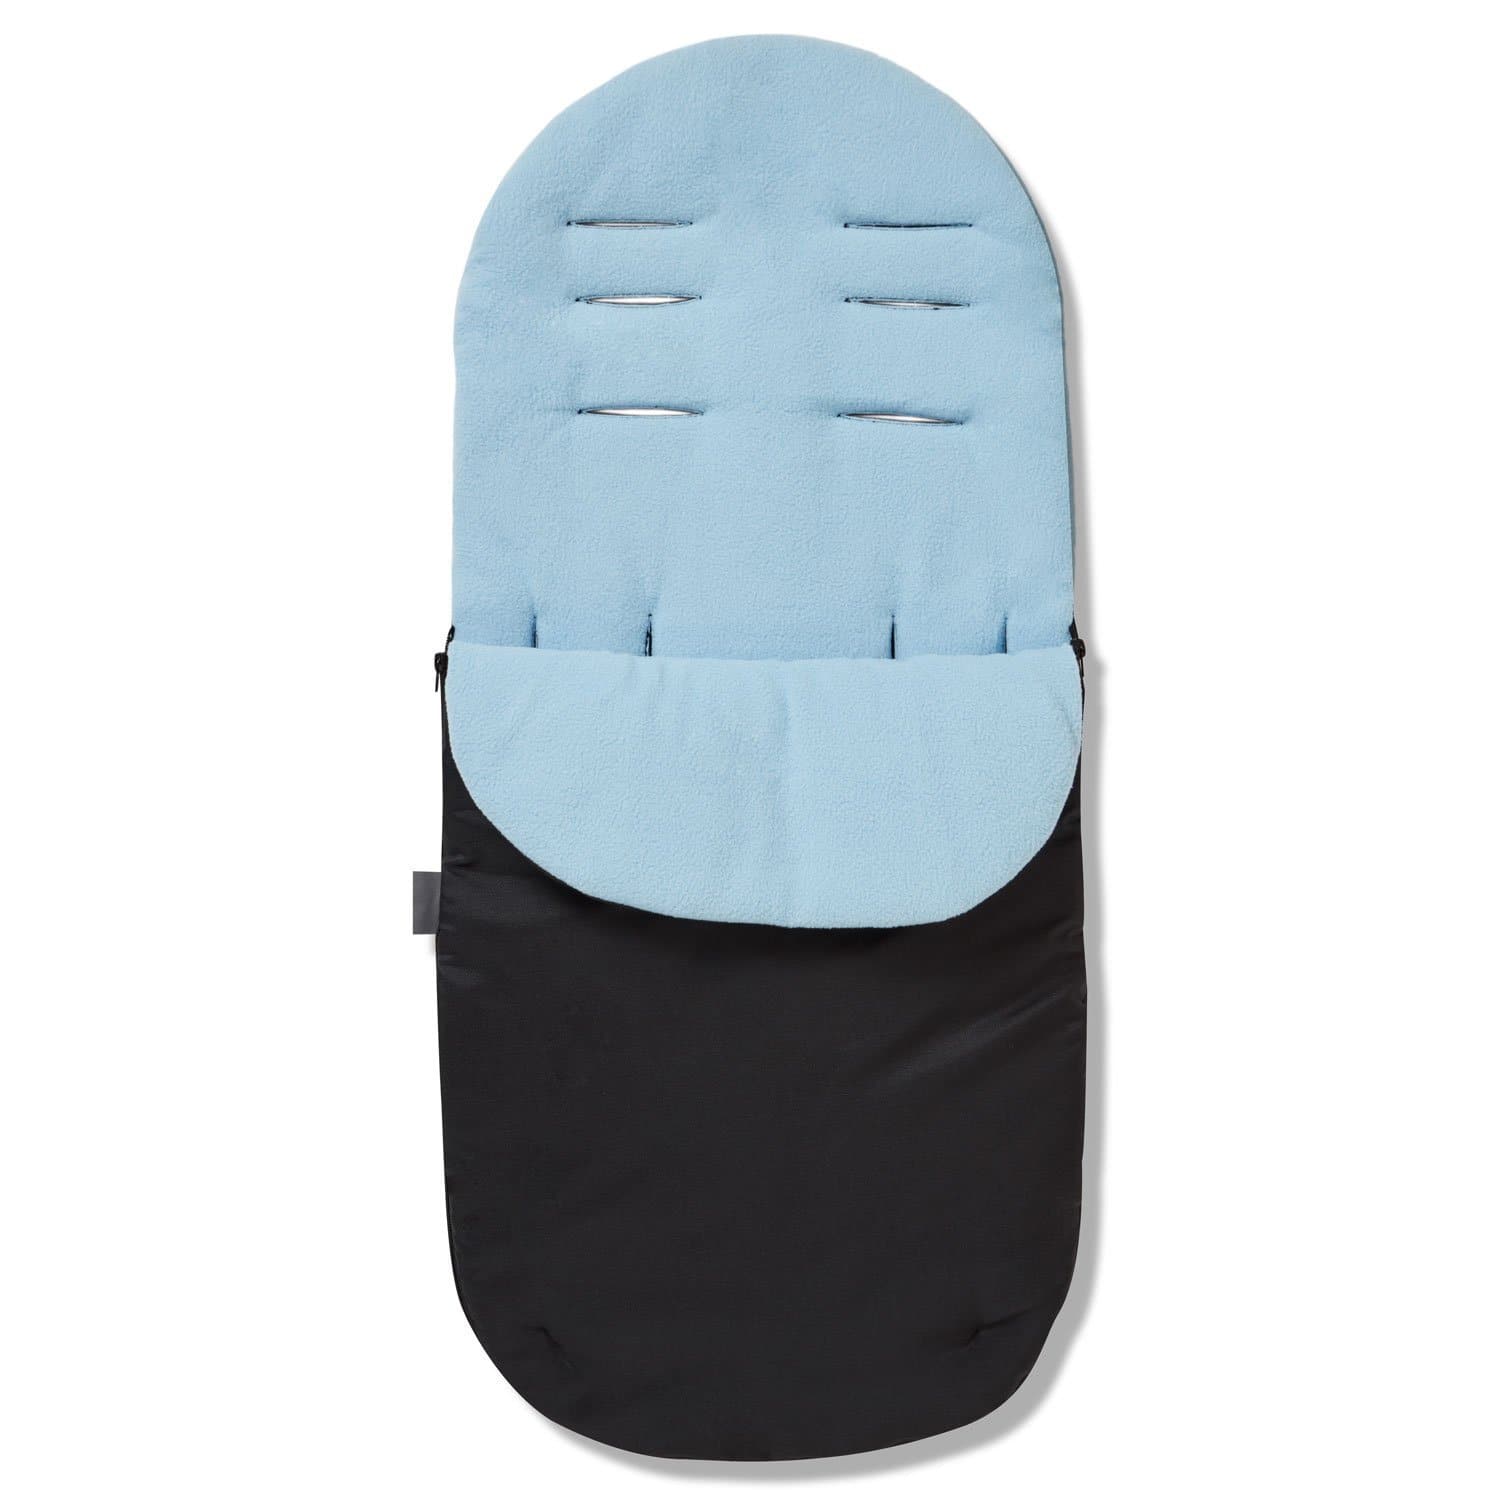 Footmuff / Cosy Toes Compatible with Joie - Light Blue / Fits All Models | For Your Little One